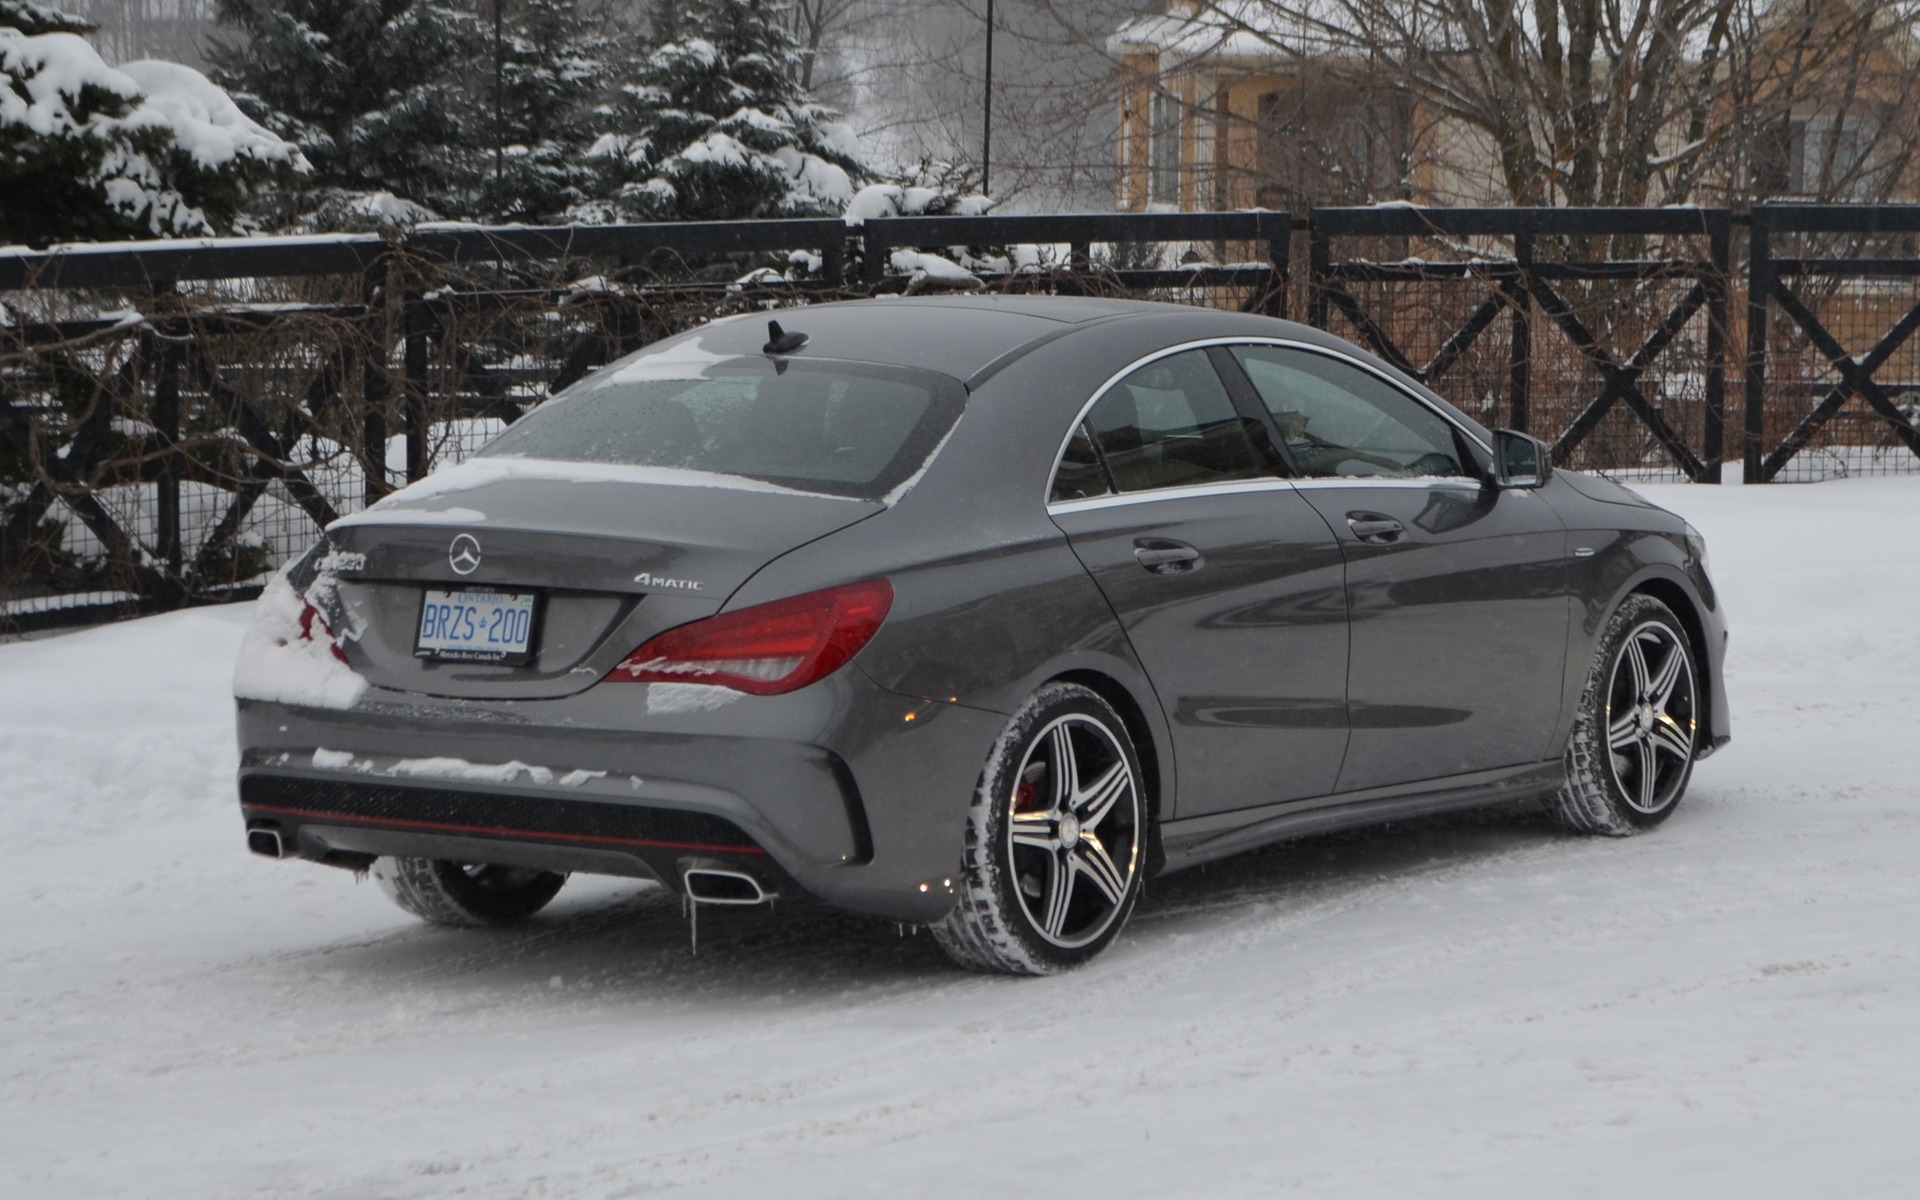 Mercedes-Benz CLA 250 4Matic: The 4Matic AWD adds about 40 kilos overall.